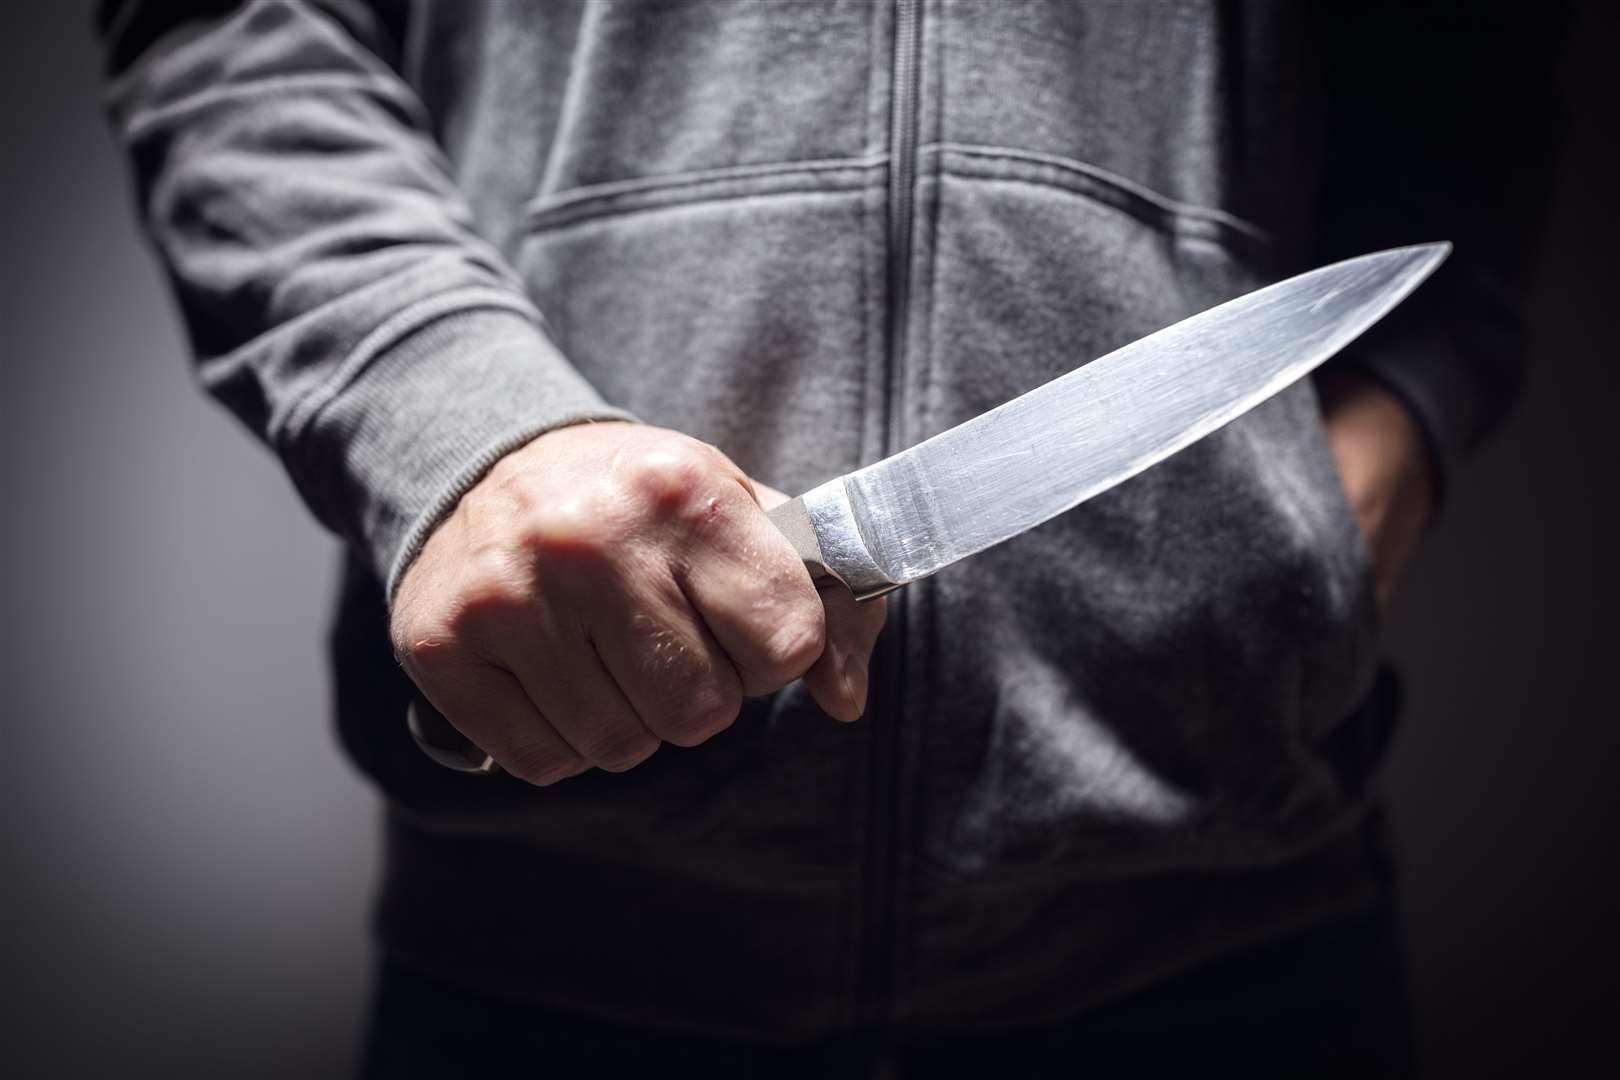 The suspected shoplifter was carrying a knife